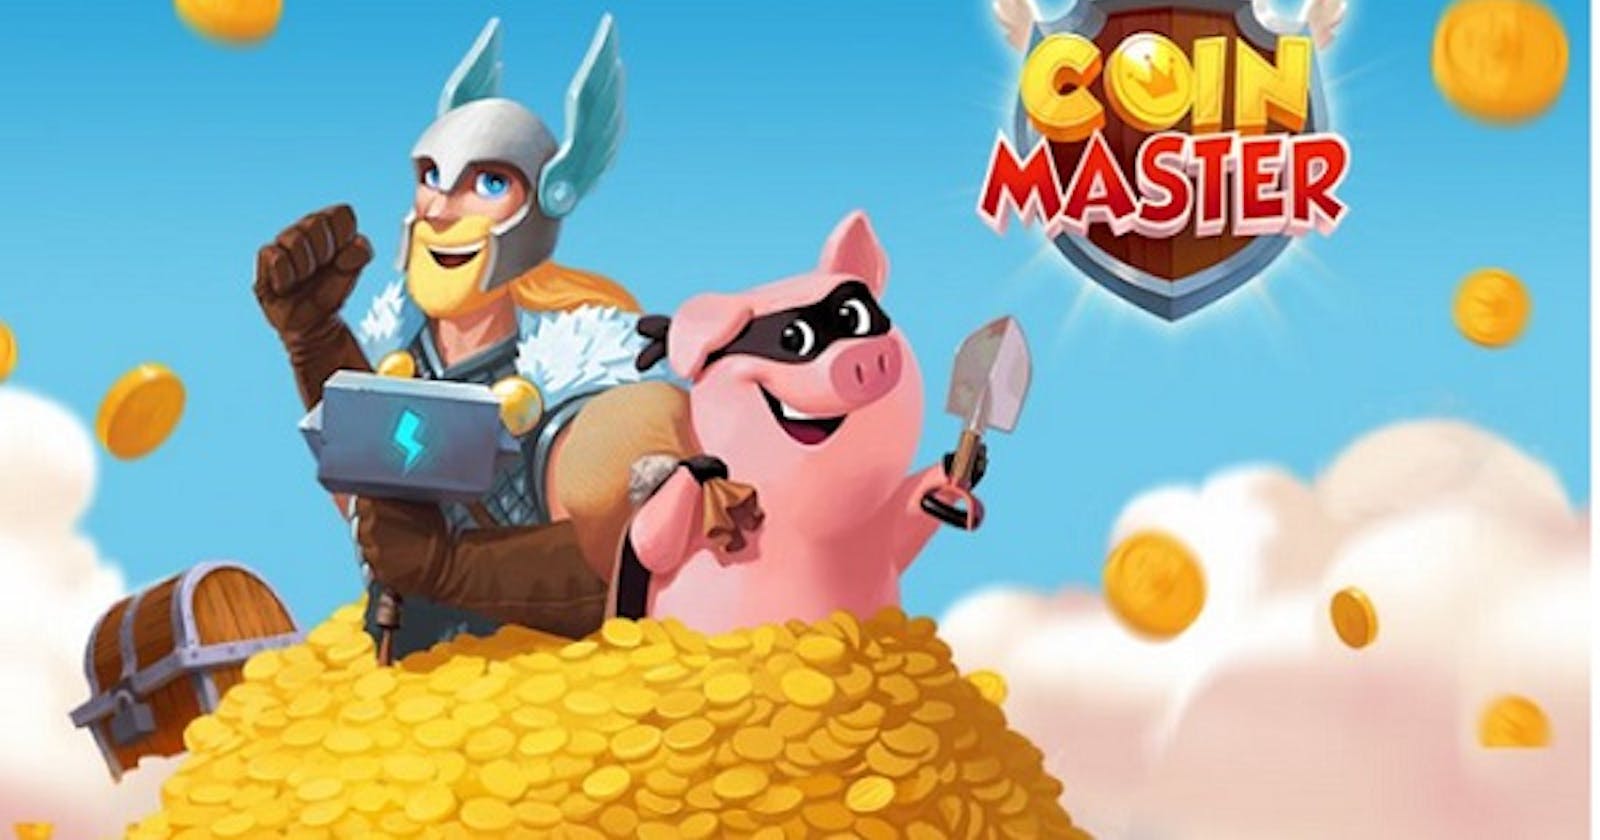 How to get free coin in Coin Master